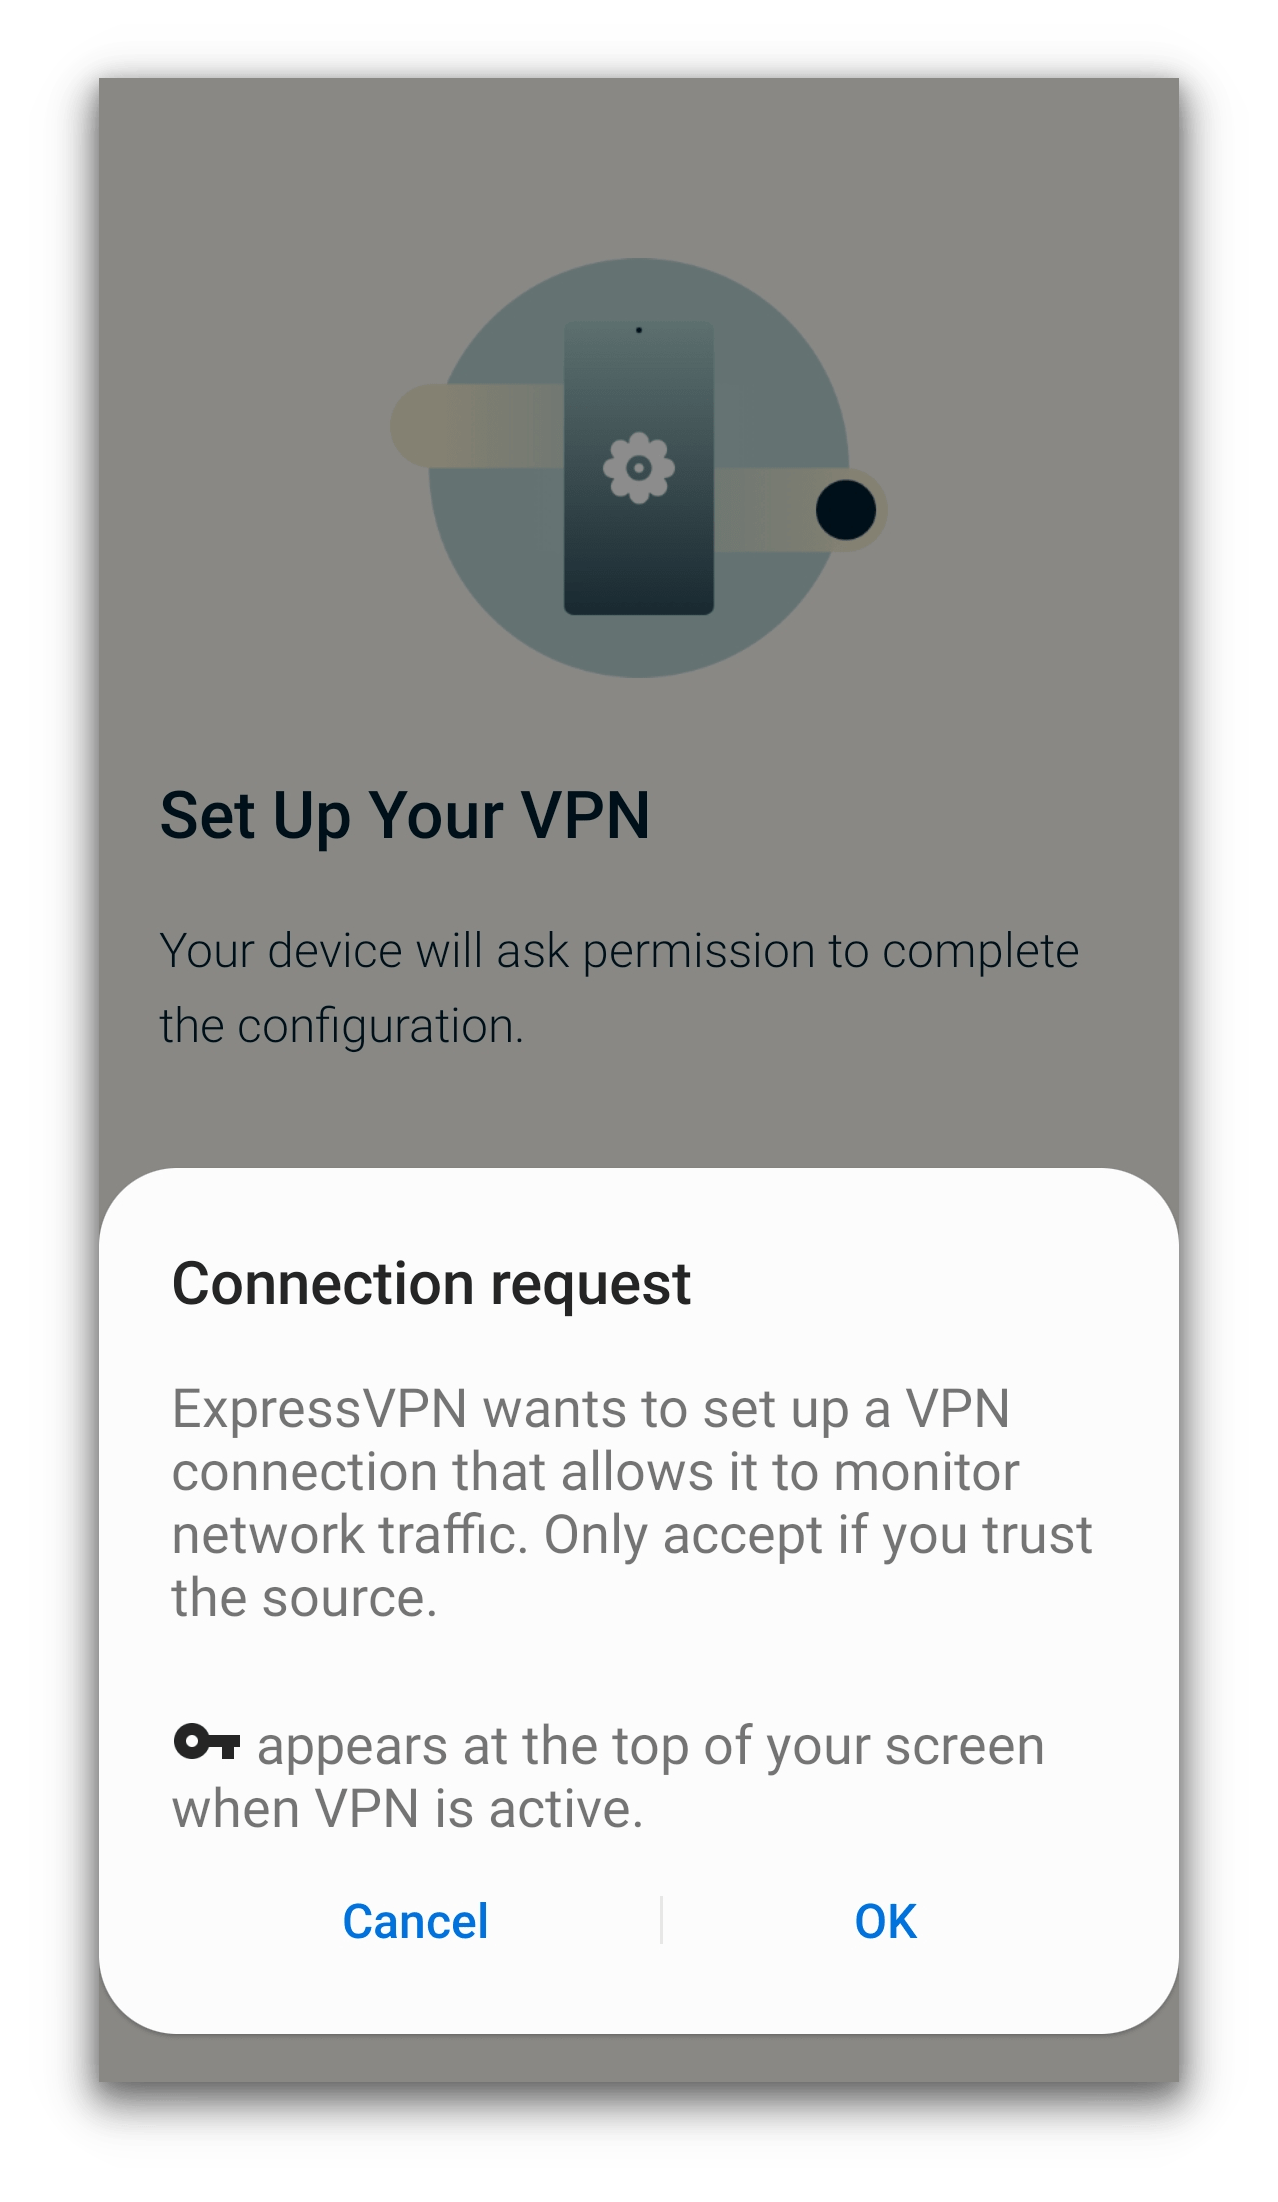 ExpressVPN requests permisson to set up a VPN connection on Android